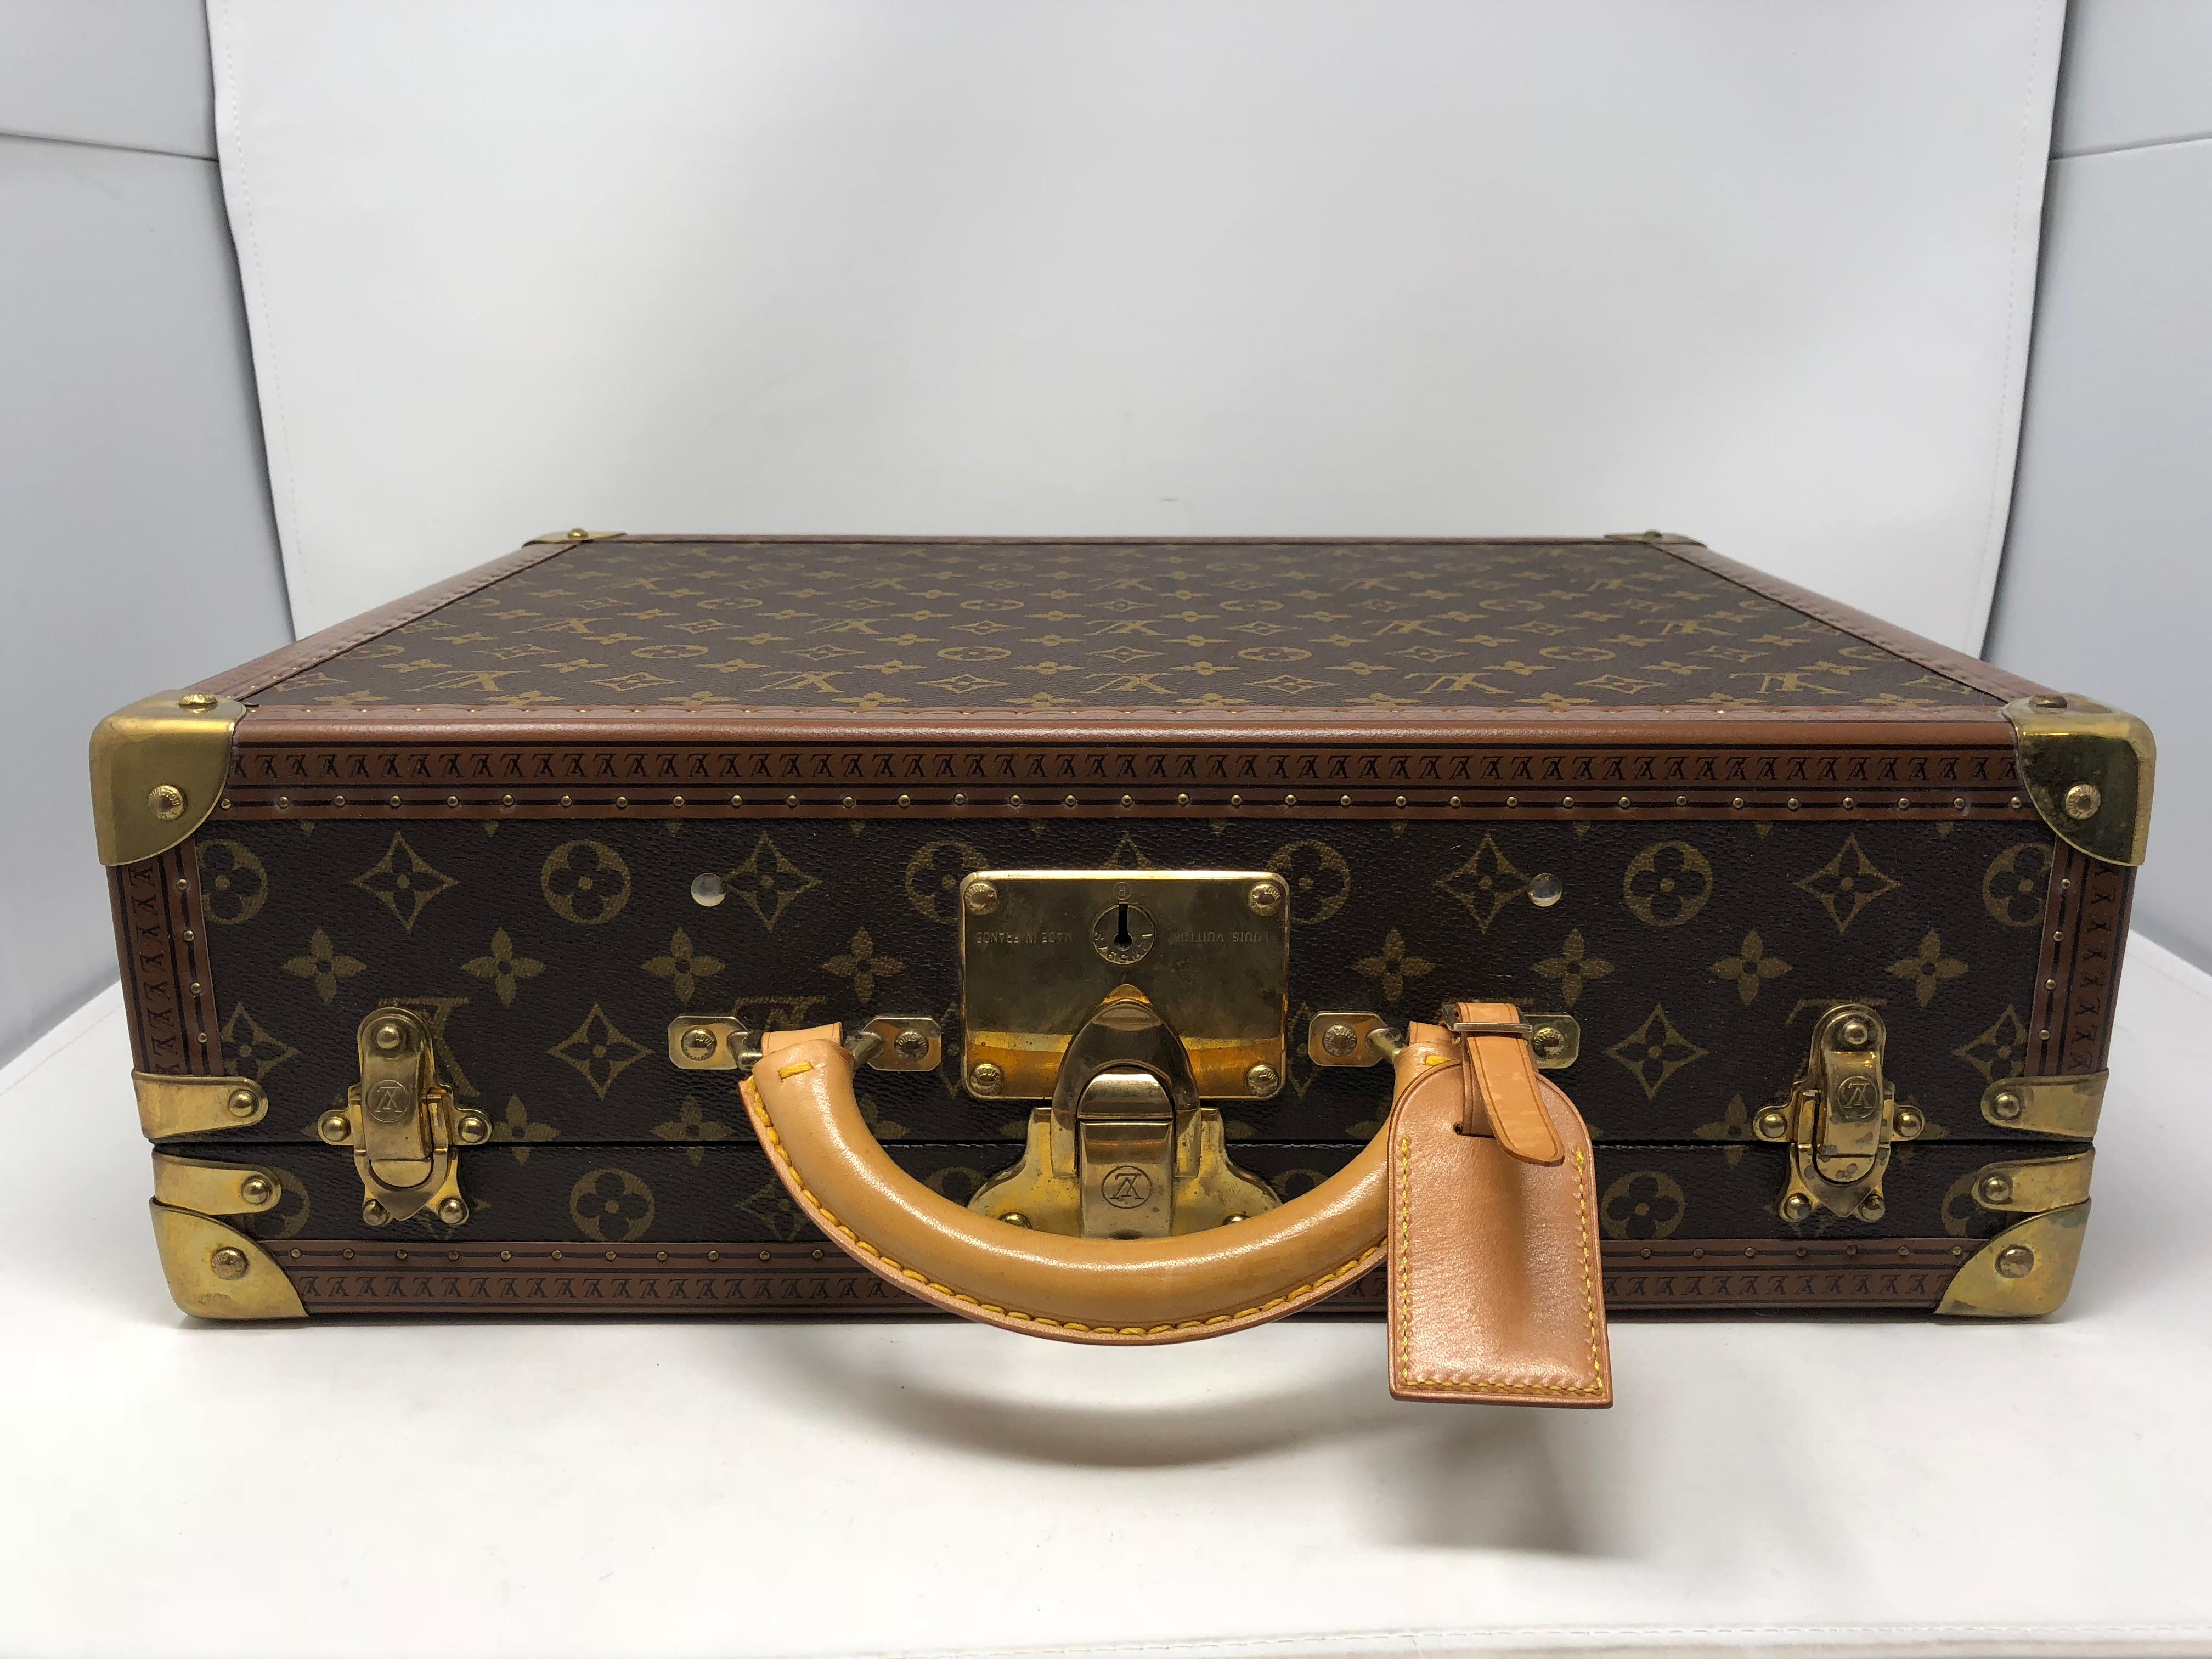 Louis Vuitton Cotteville 50 hard sided suitcase or briefcase. The little brother of the Alzer and Bisten, this case has generous room for all your essentials. Interior is like new and exterior has light wear. Great overall condition. This is a